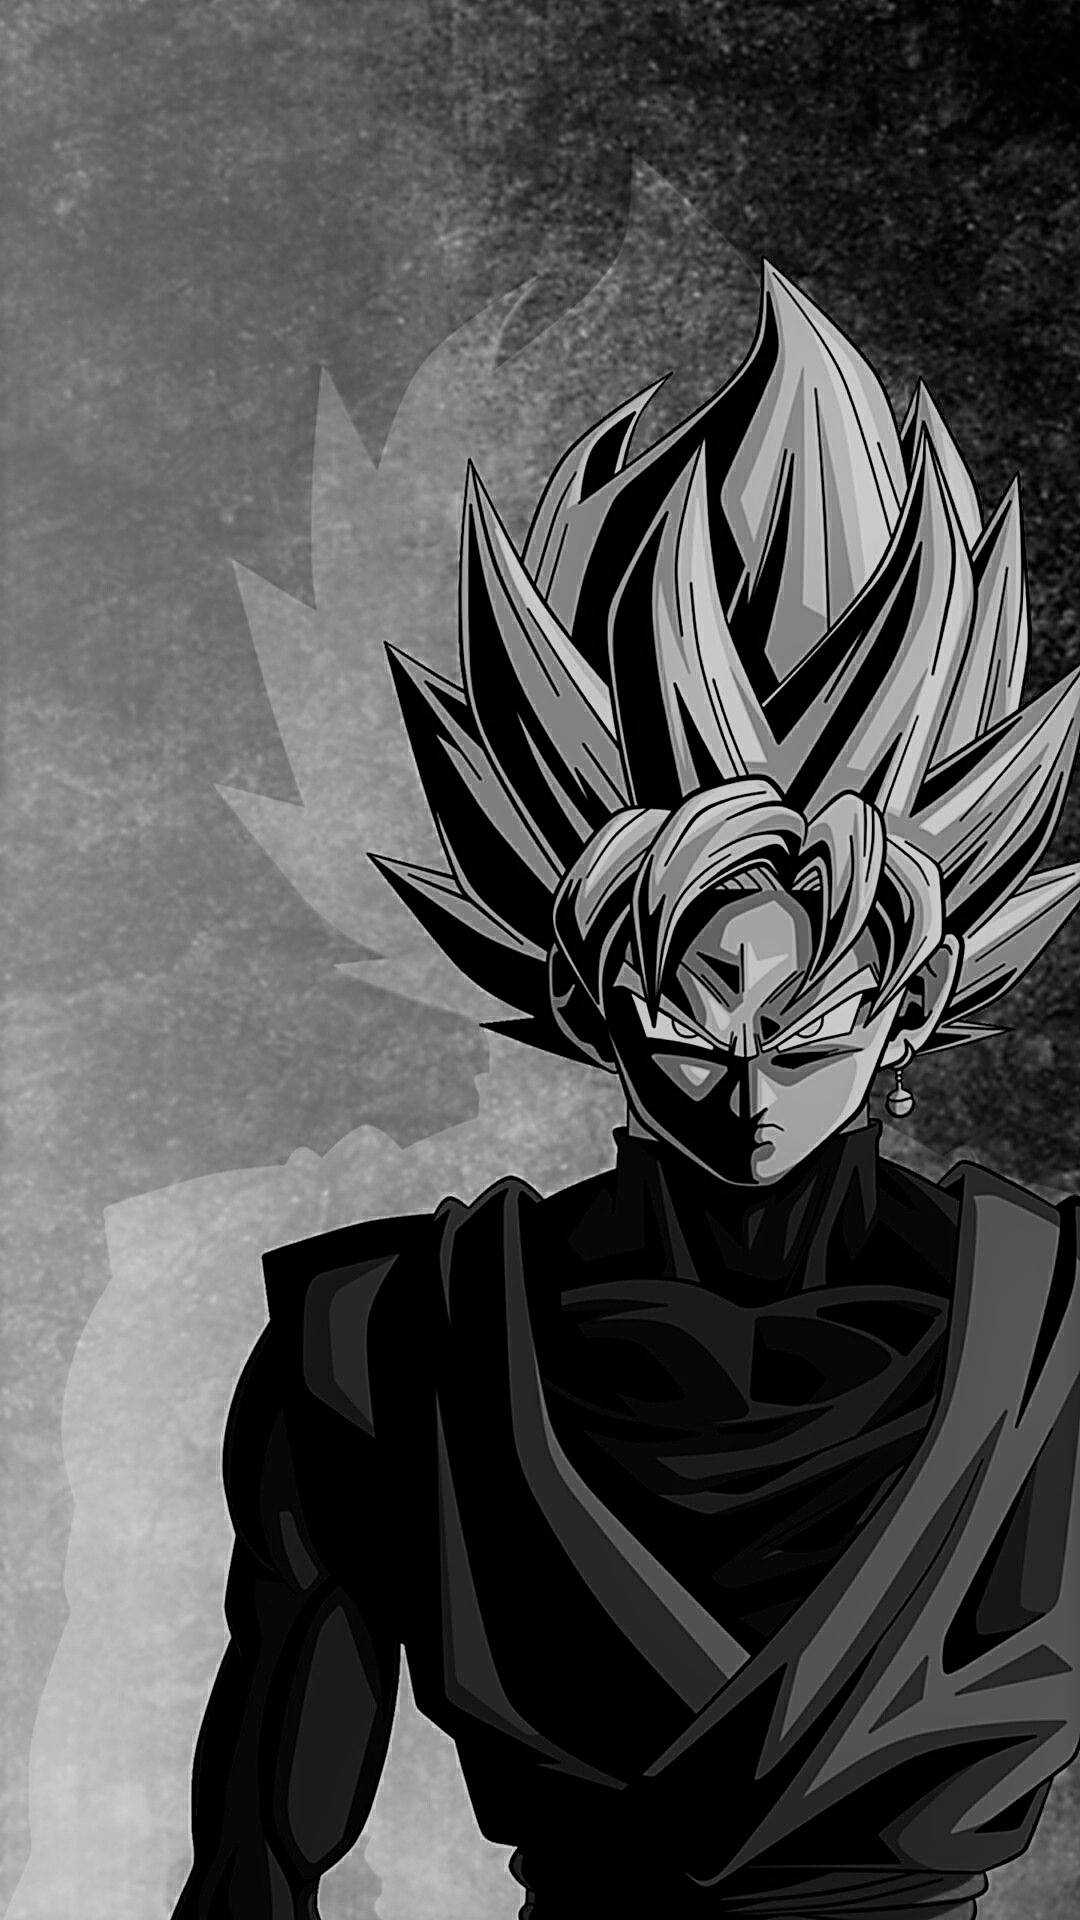 Goku in Black and White Wallpaper